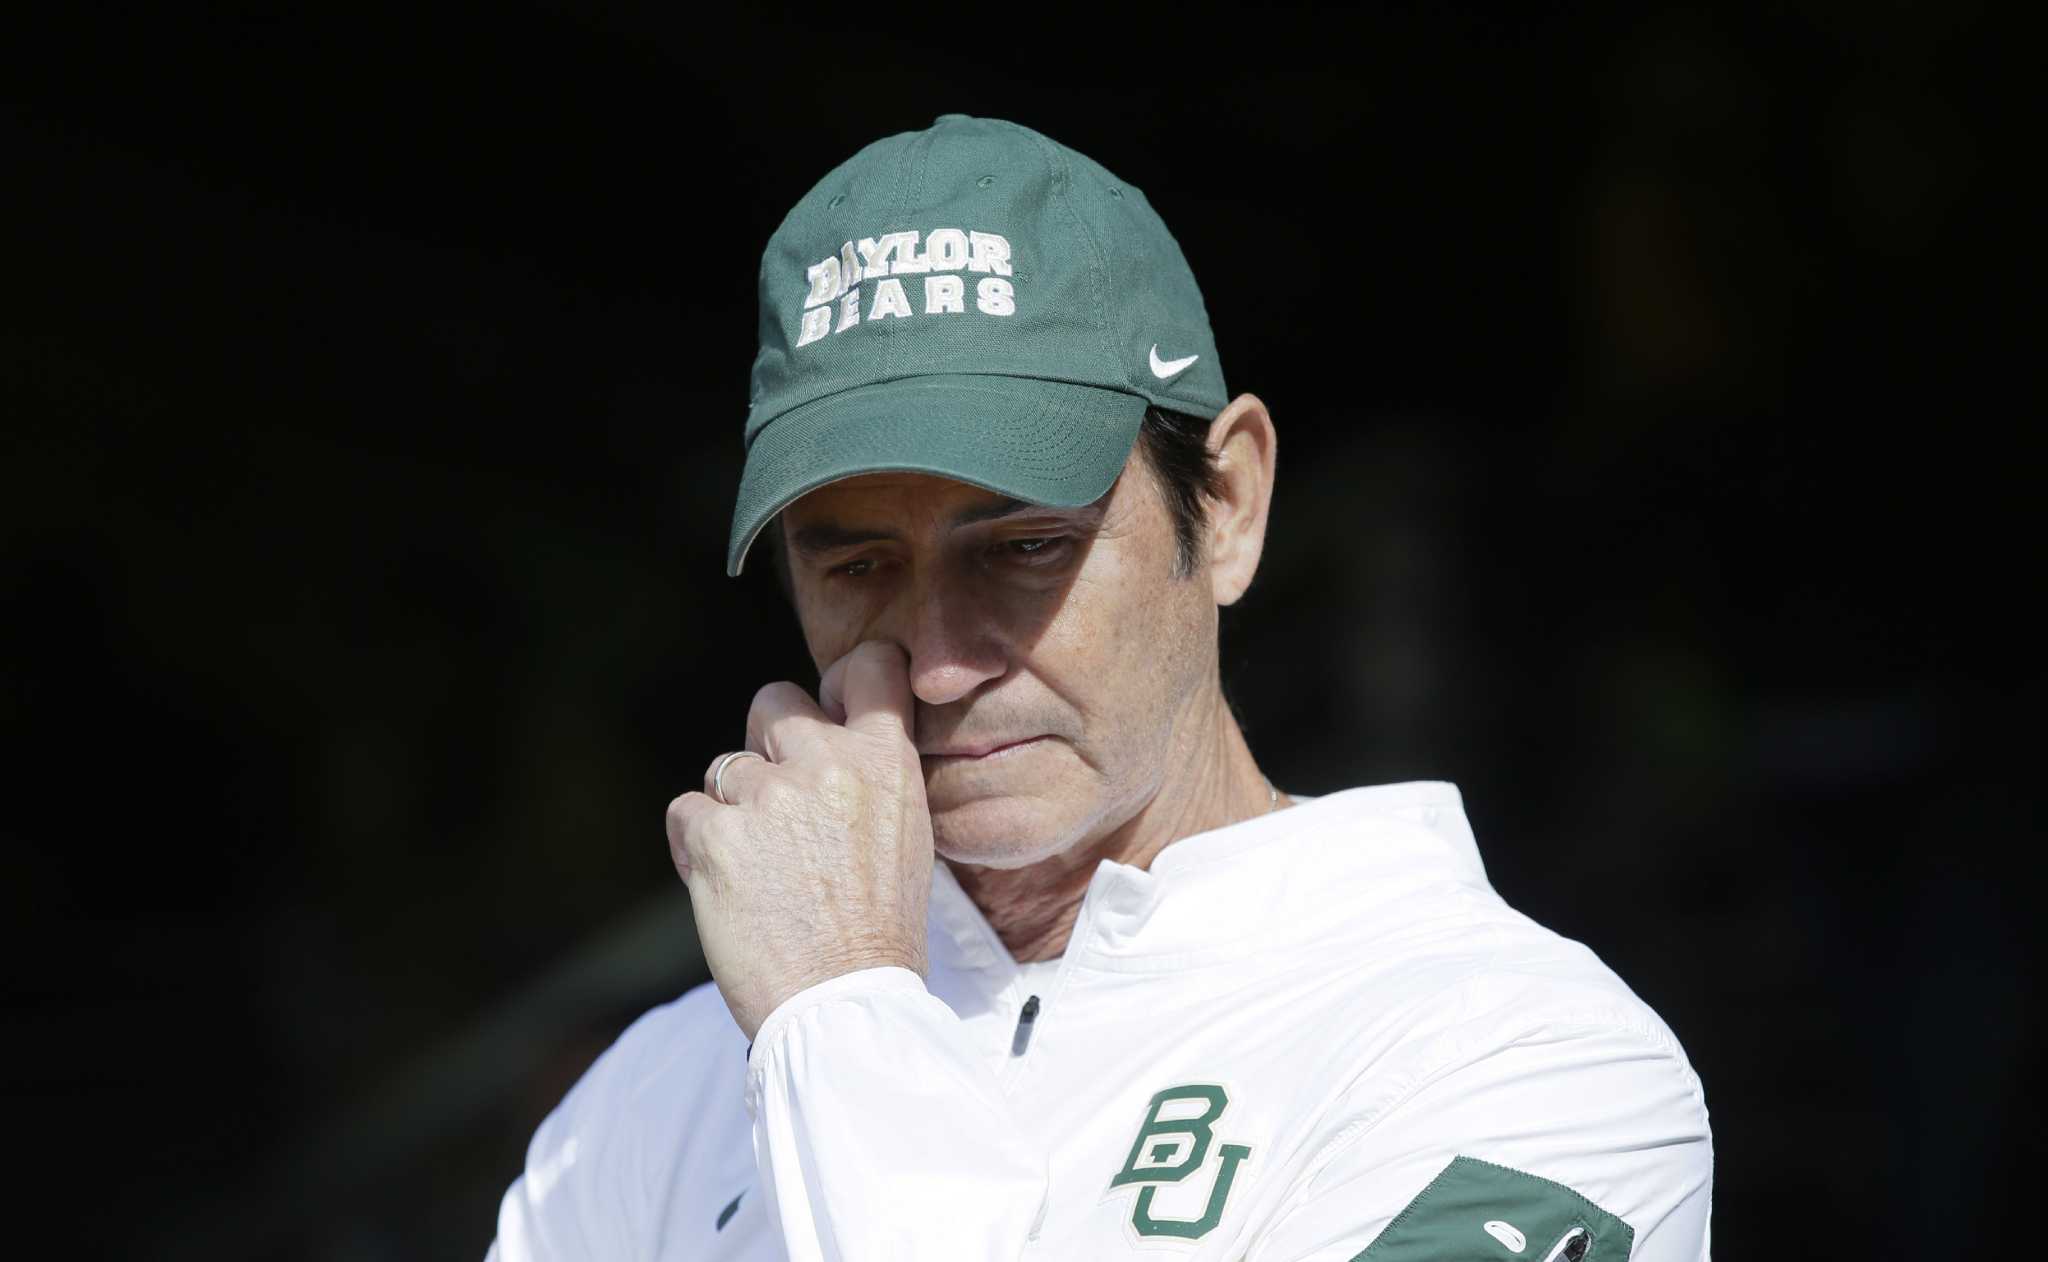 Baylor officials did absolutely nothing soon after becoming notified of assaults